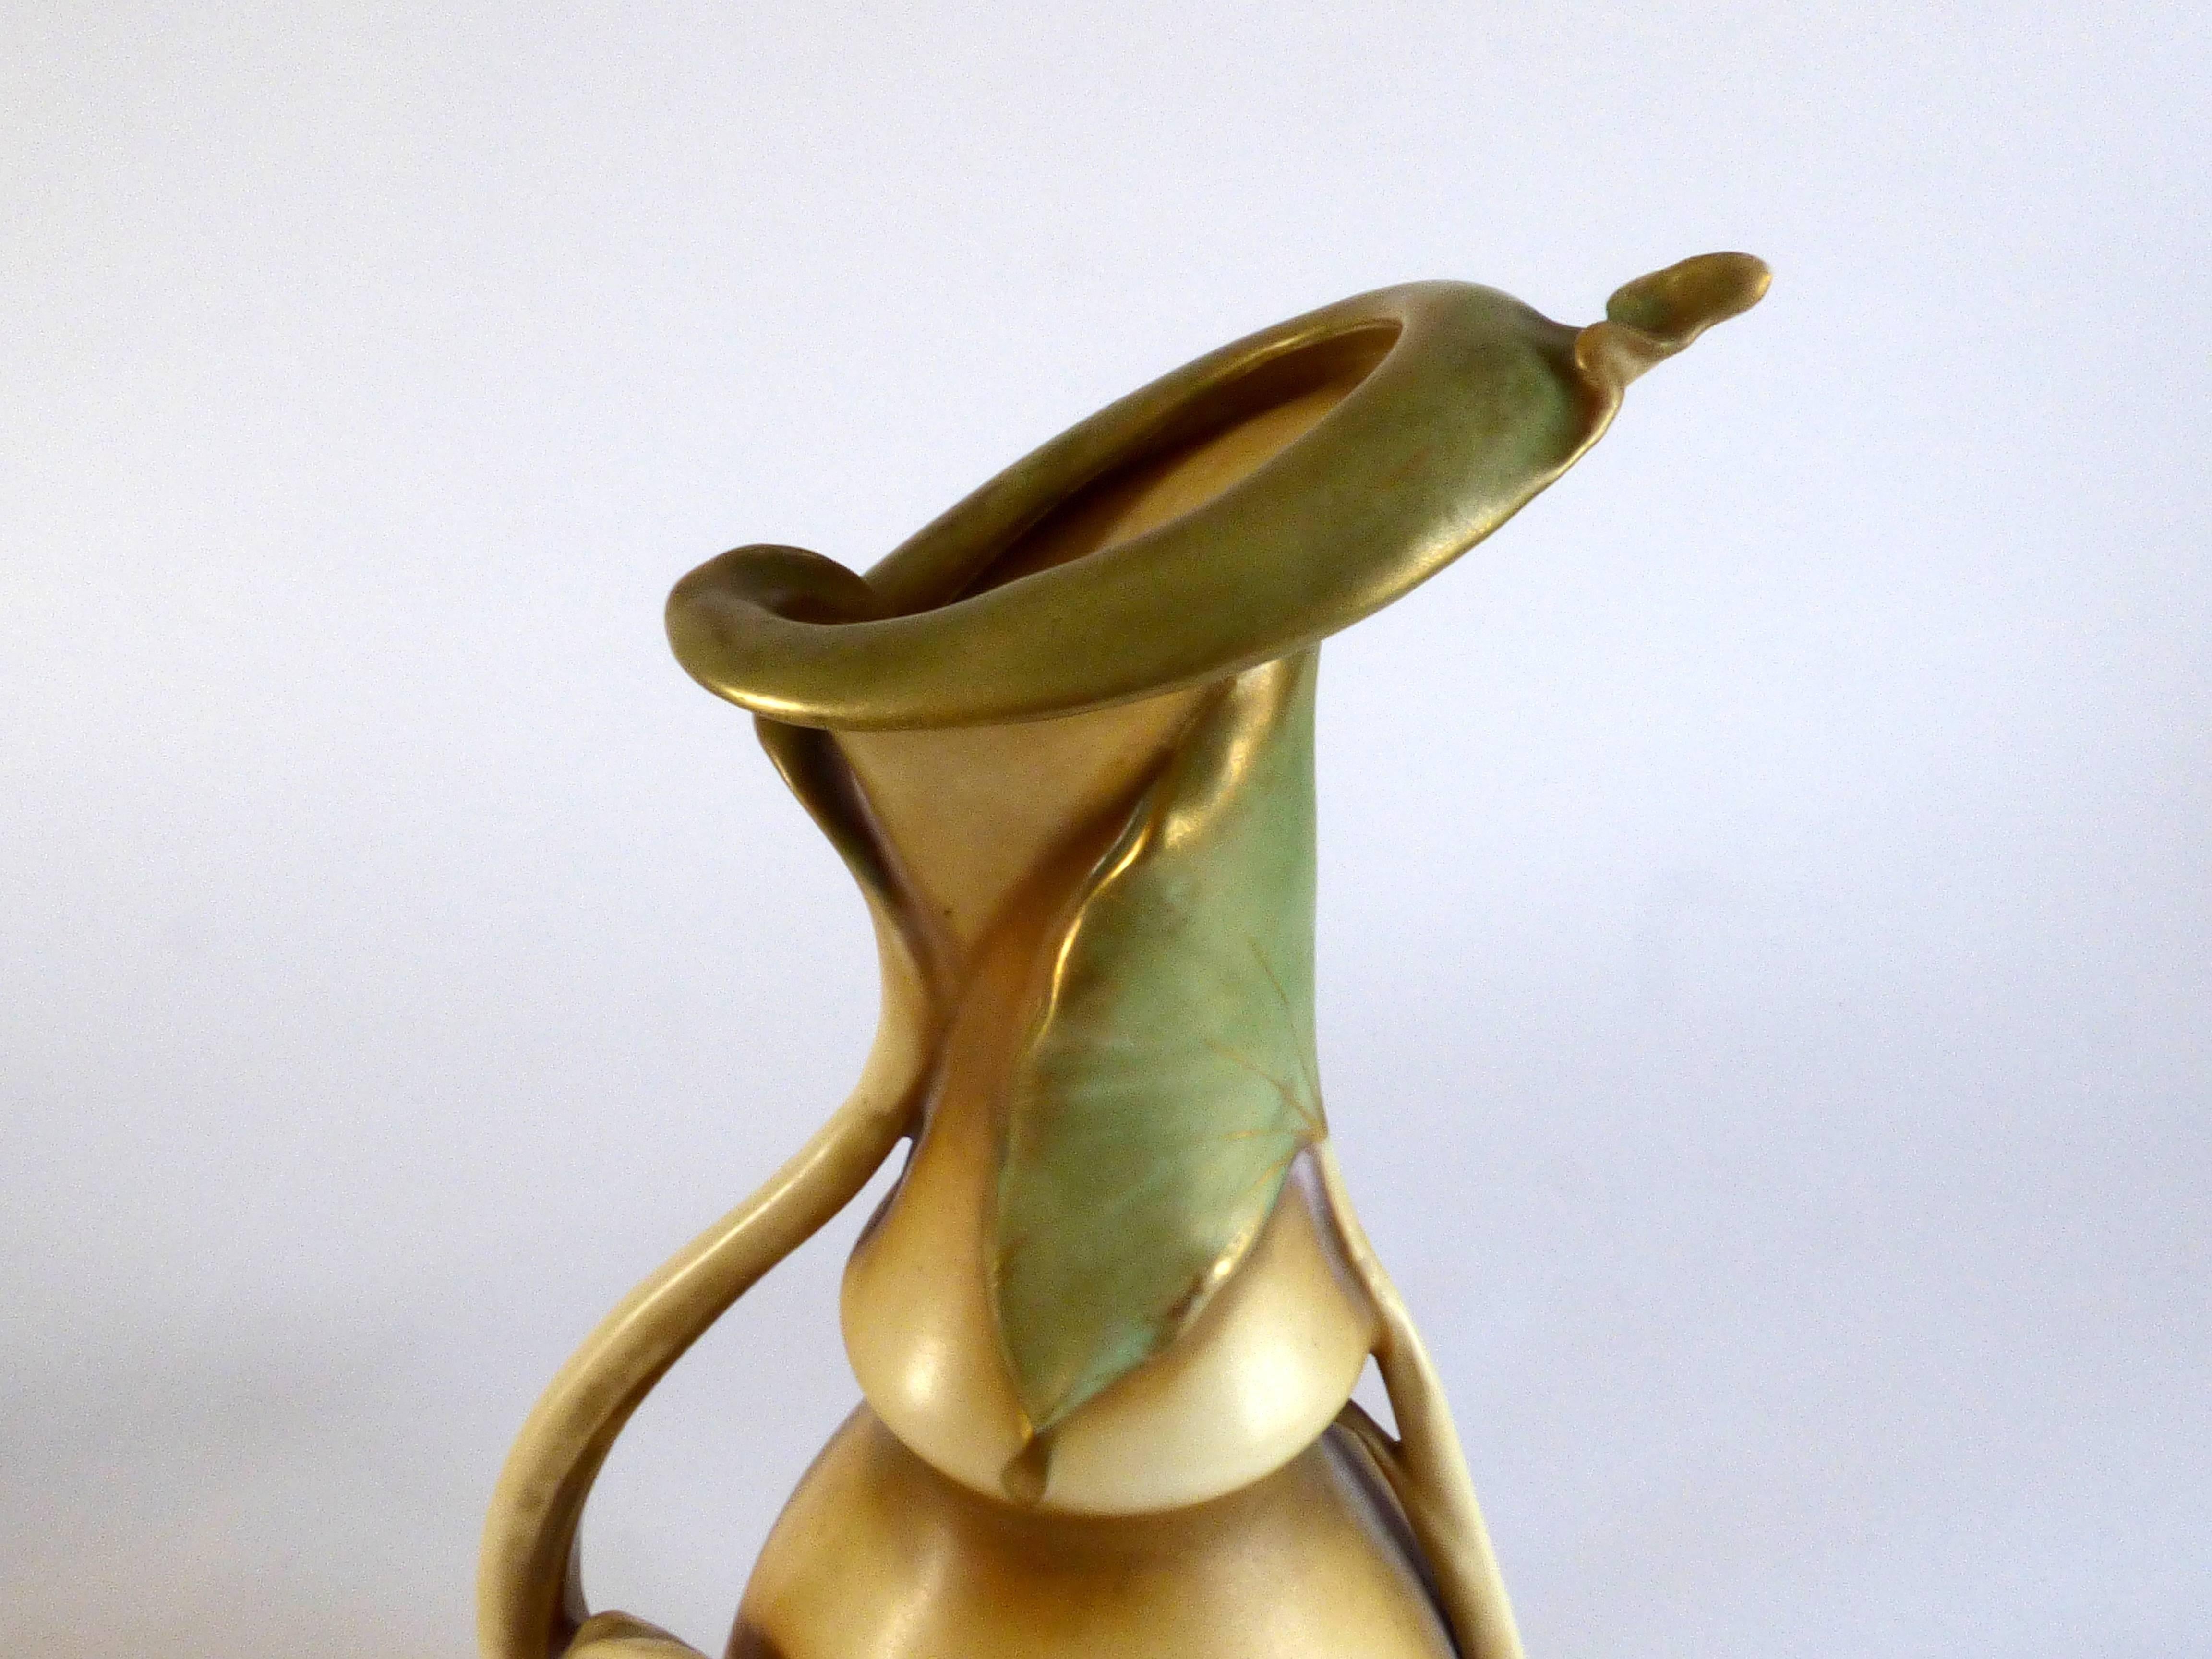 A ceramic Art Nouveau vase produced by Turn-Teplitz, Bohemia, made in Austria. Amphora manufacture between 1892 and 1905. Signed.